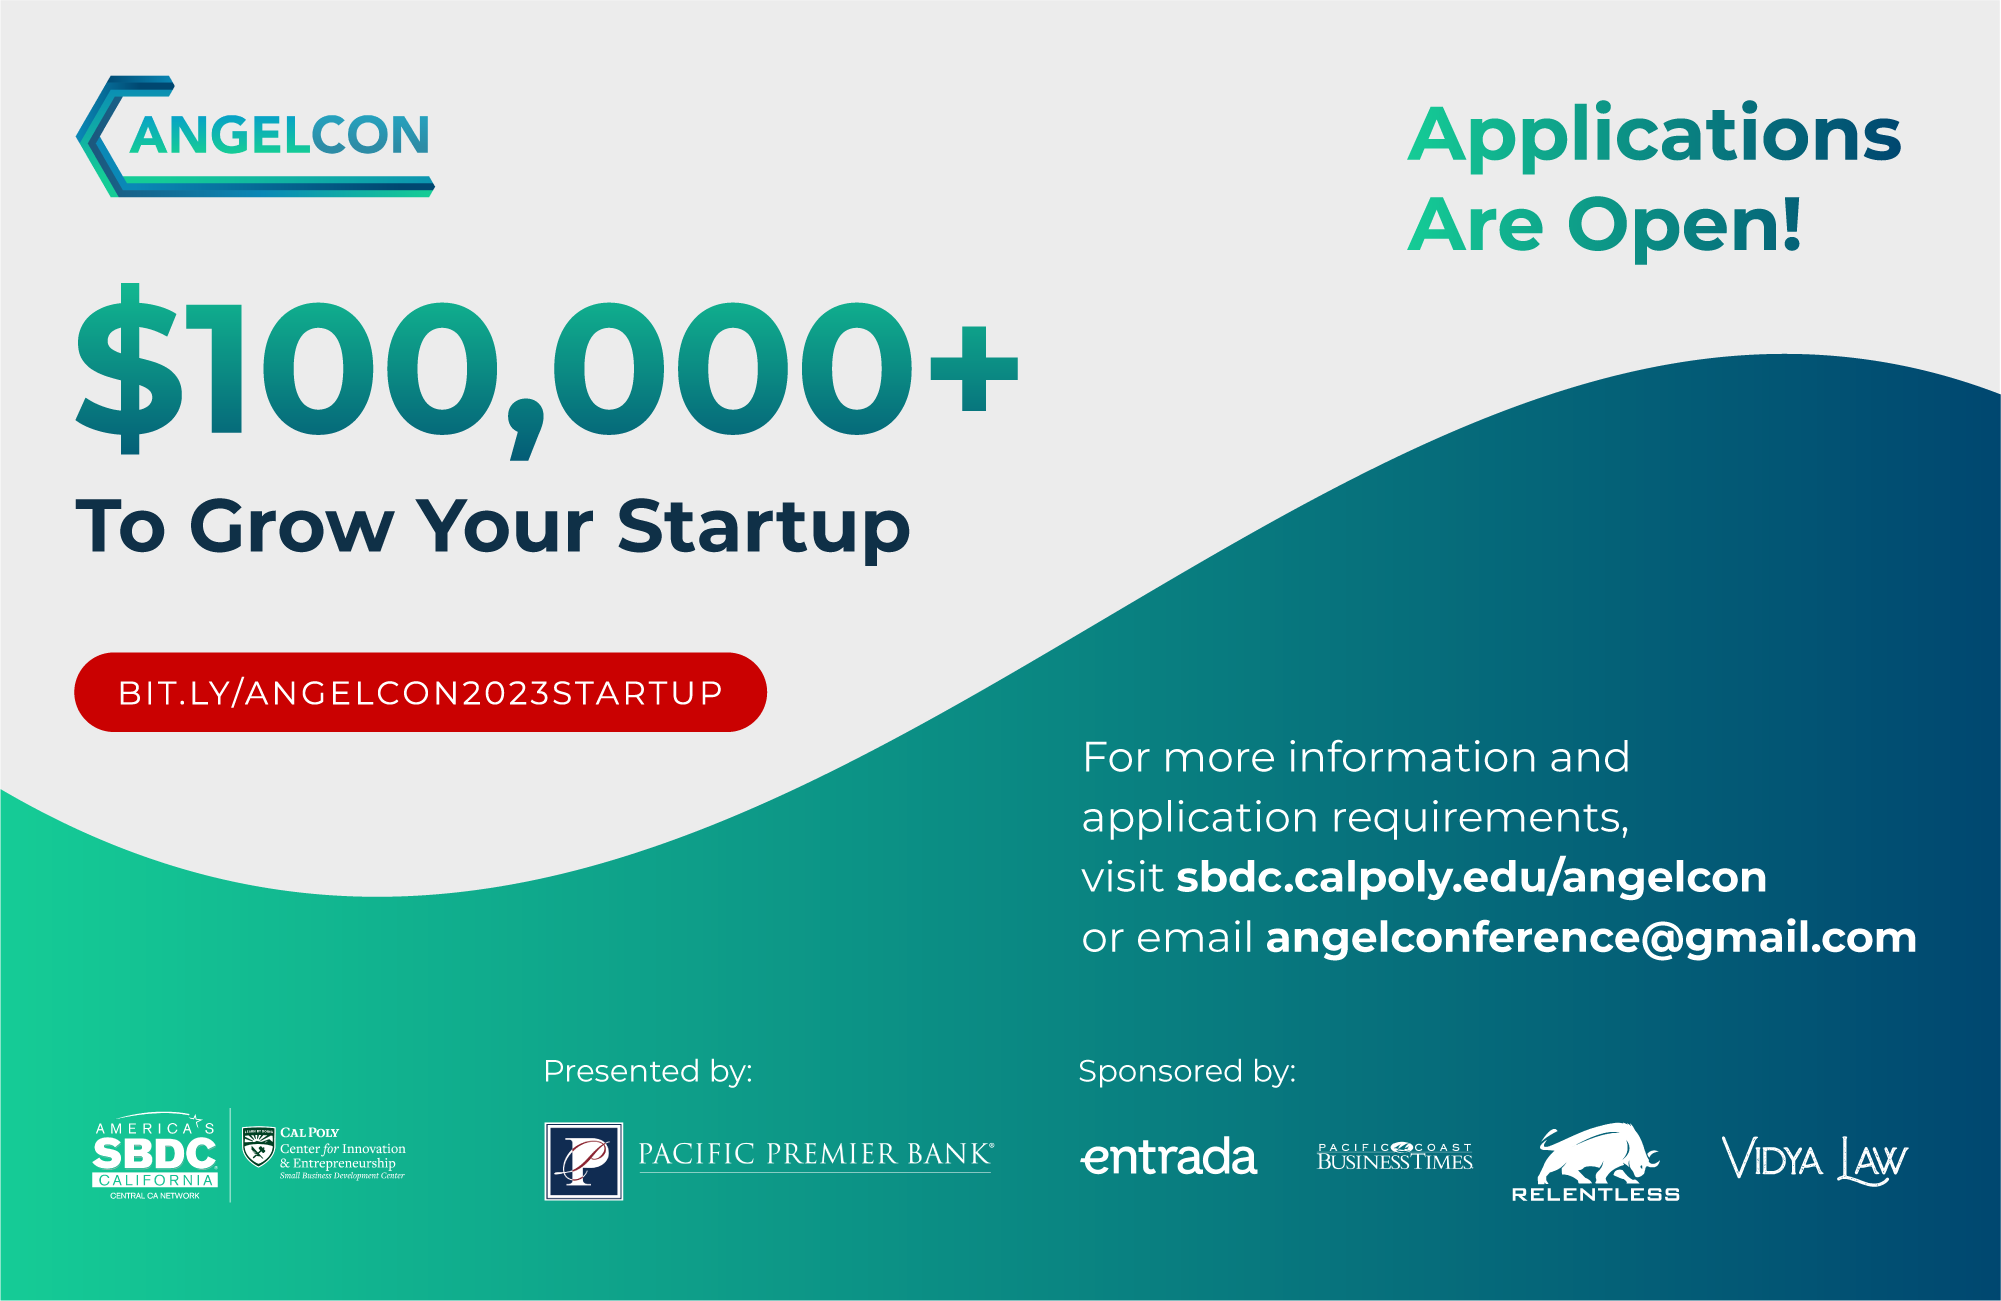 angelcon 2023 startup application